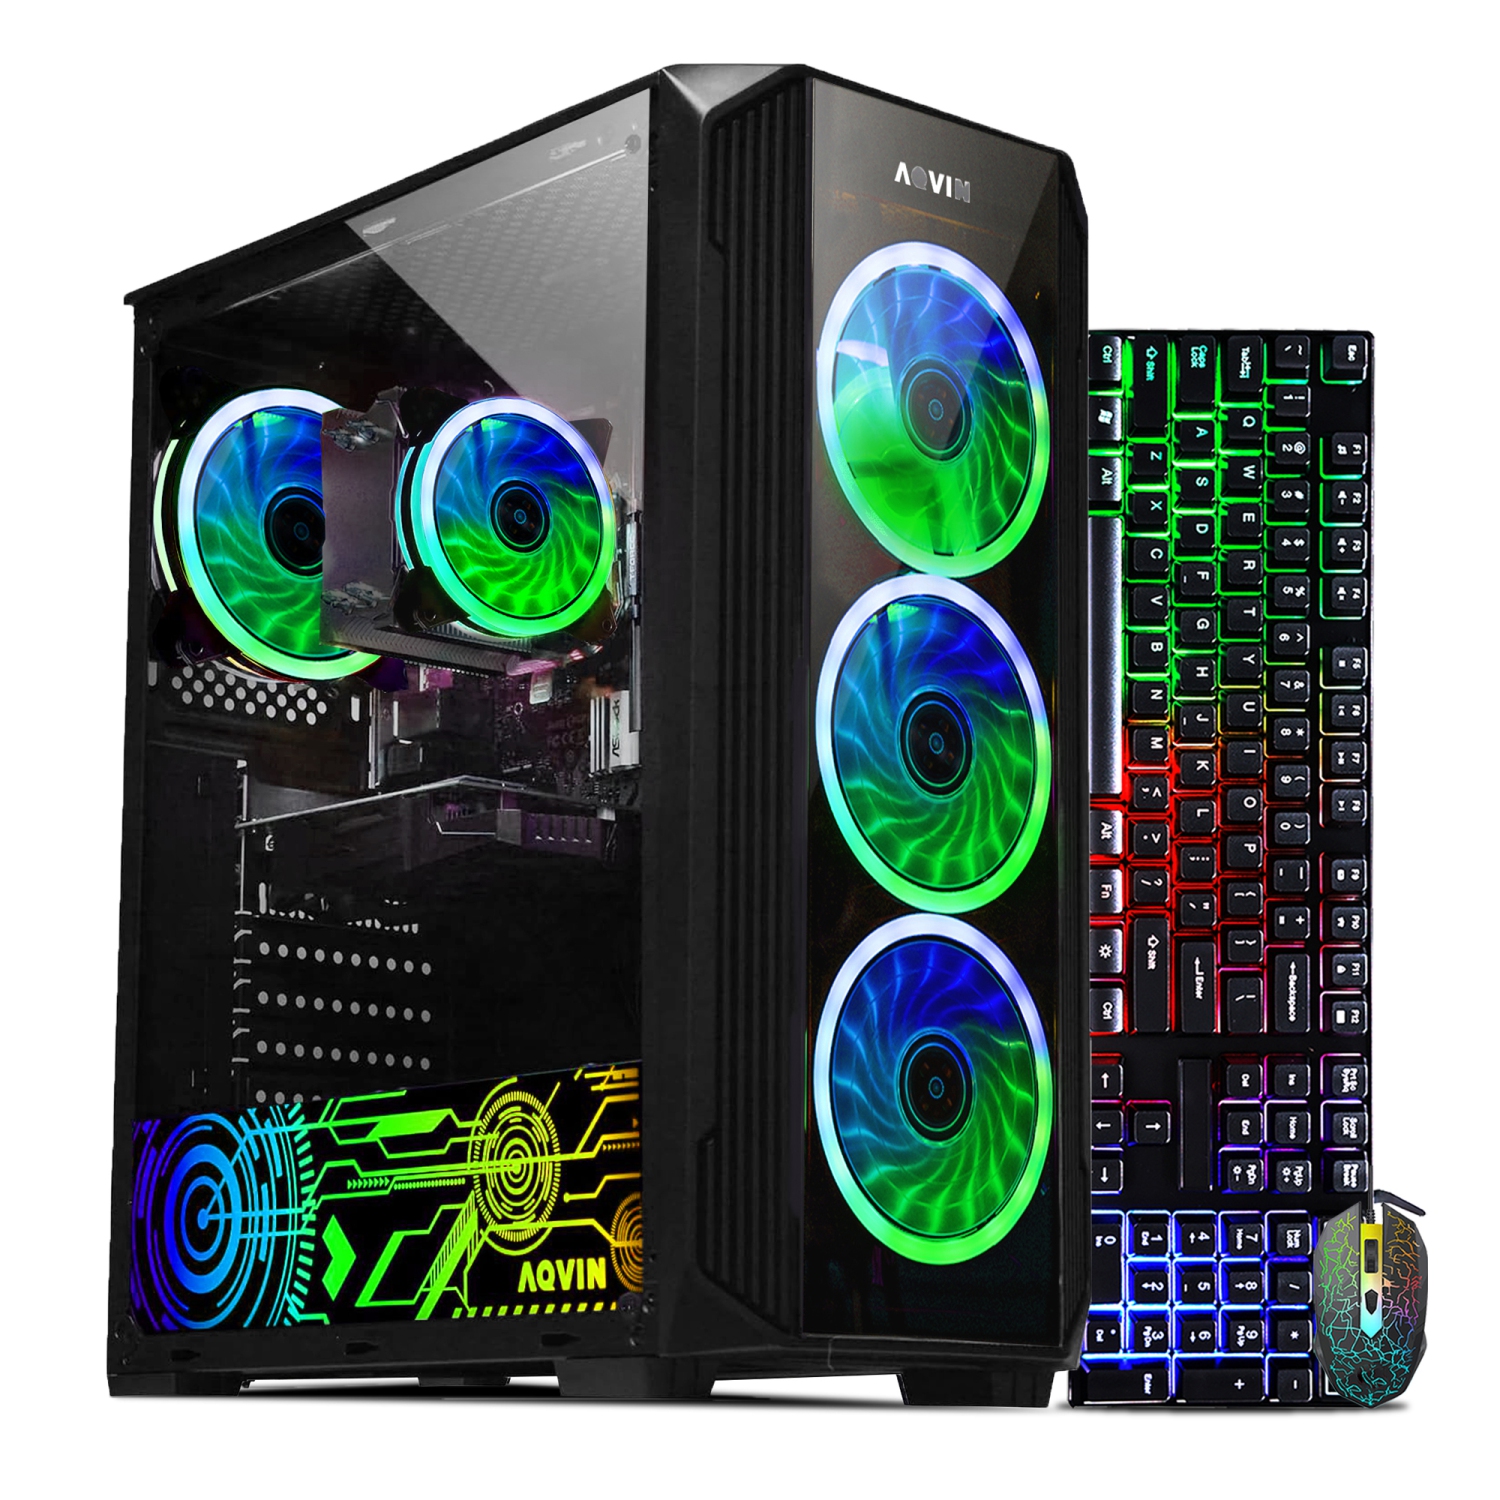 Refurbished (Excellent) Gaming PC AQVIN Tower Desktop Computer - Intel Core i7 up to 4.0 GHz - 1TB SSD - 32GB DDR4 RAM - RTX 3050 8GB Windows 10 Pro - Only at Best Buy